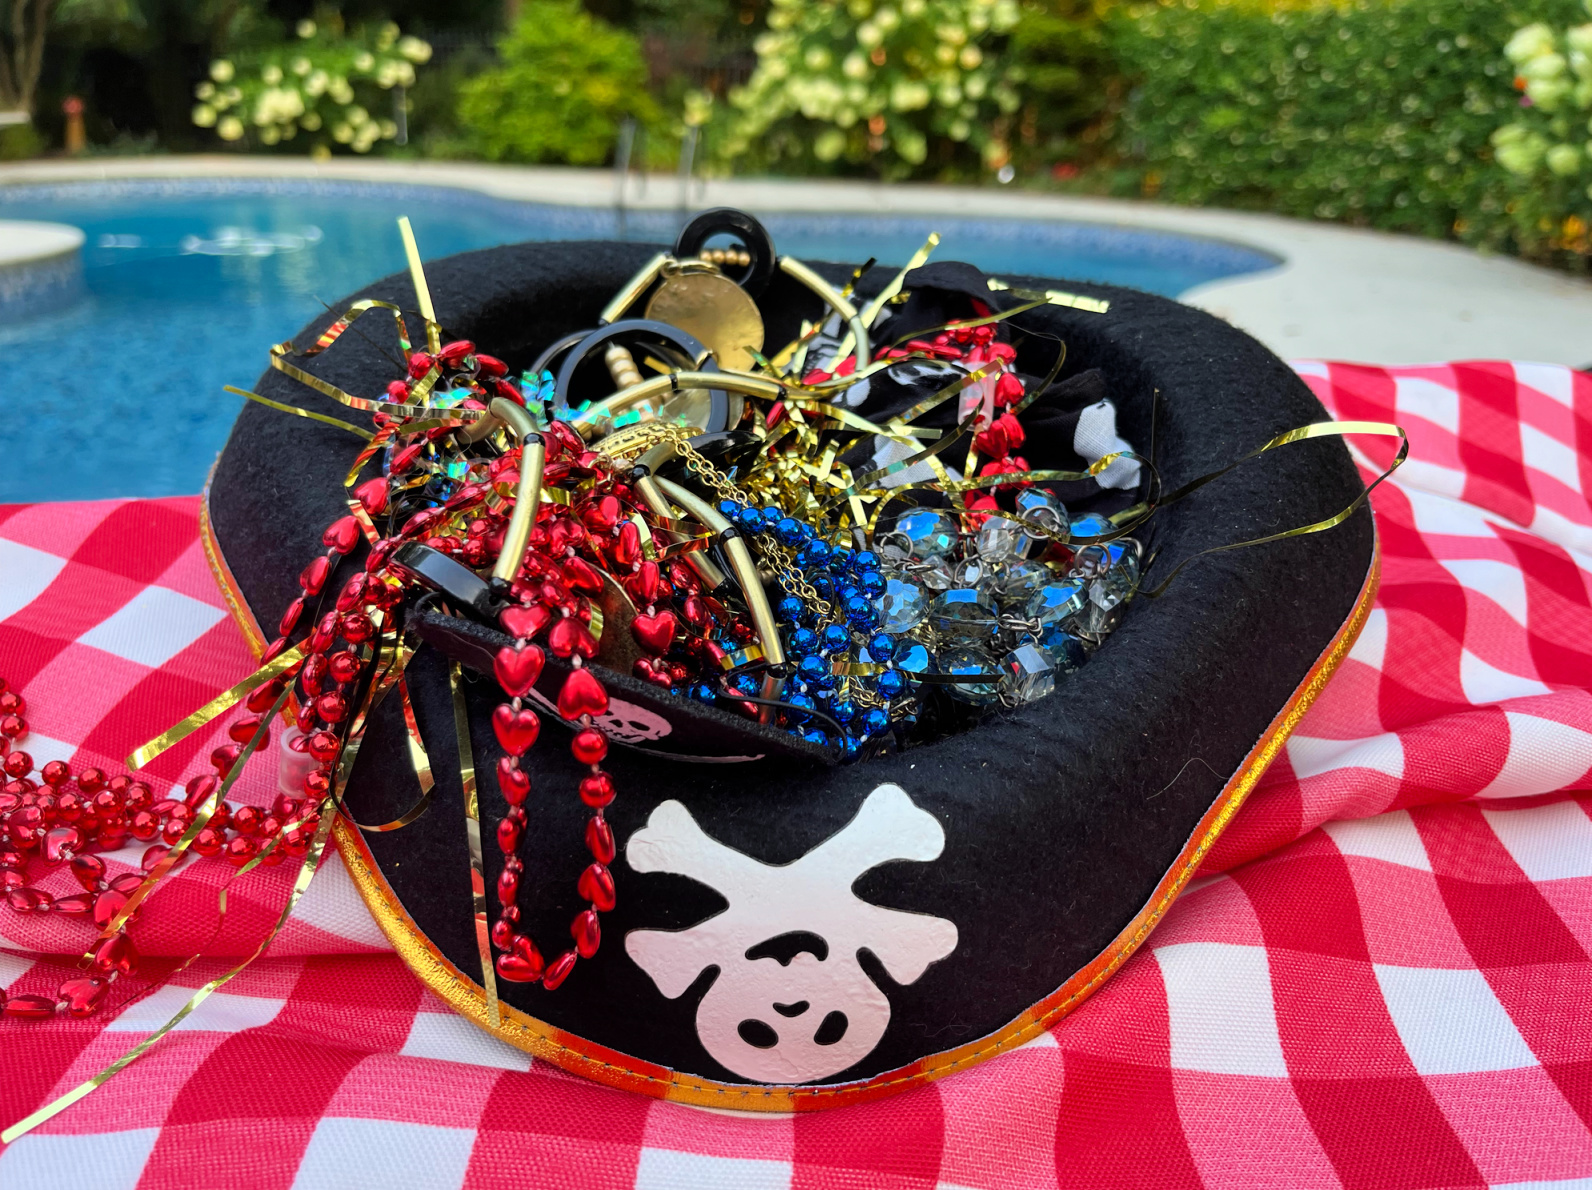 kids pool party ideas with a pirate theme